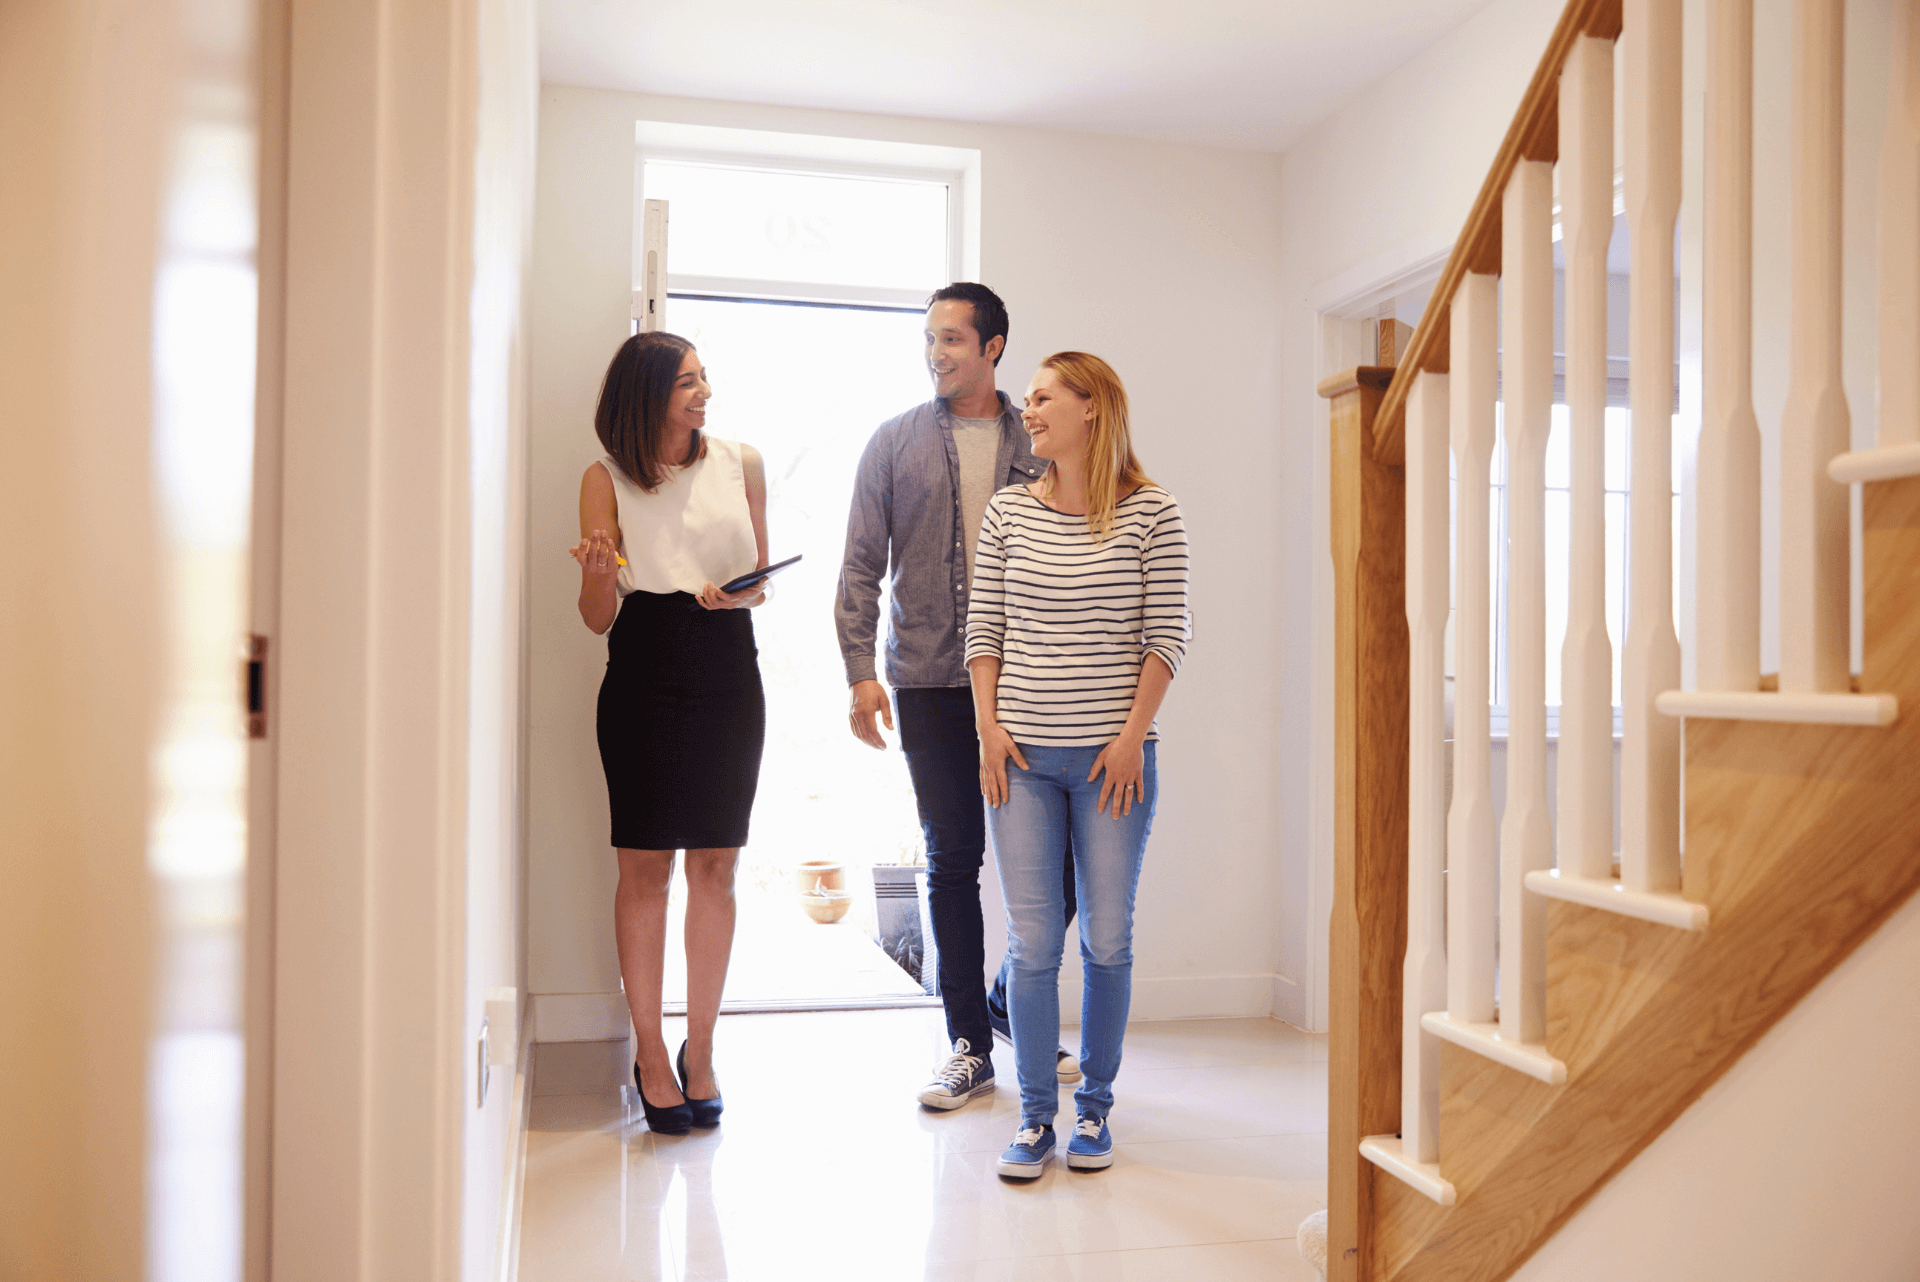 5 Common Problems People Encounter When Pre-Buying Property Off the Plan